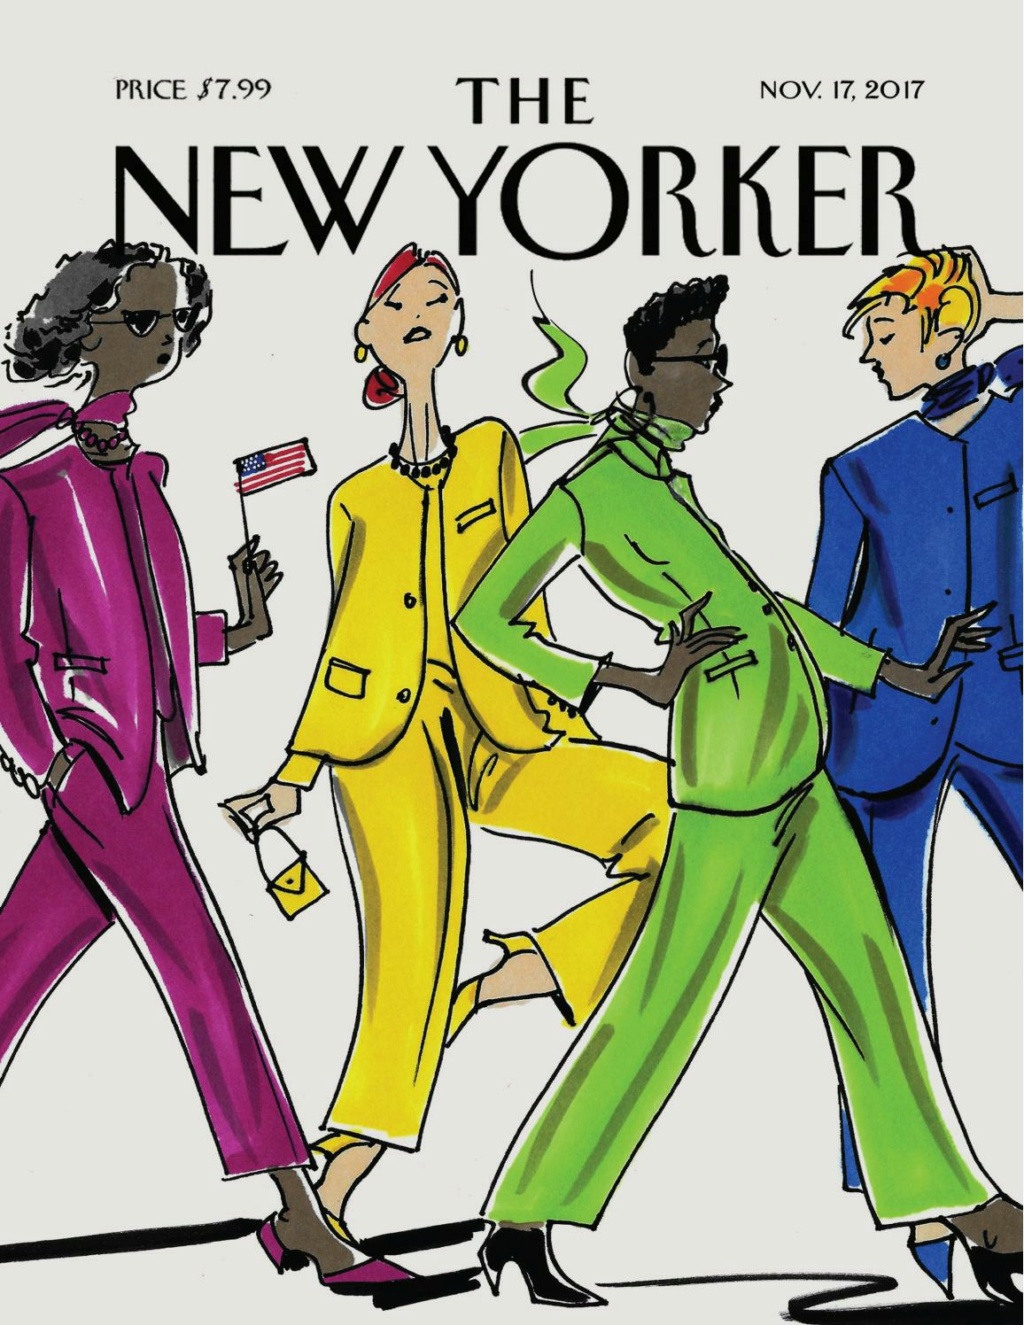 The New Yorker : Les couvertures - Page 2 Mokshi14